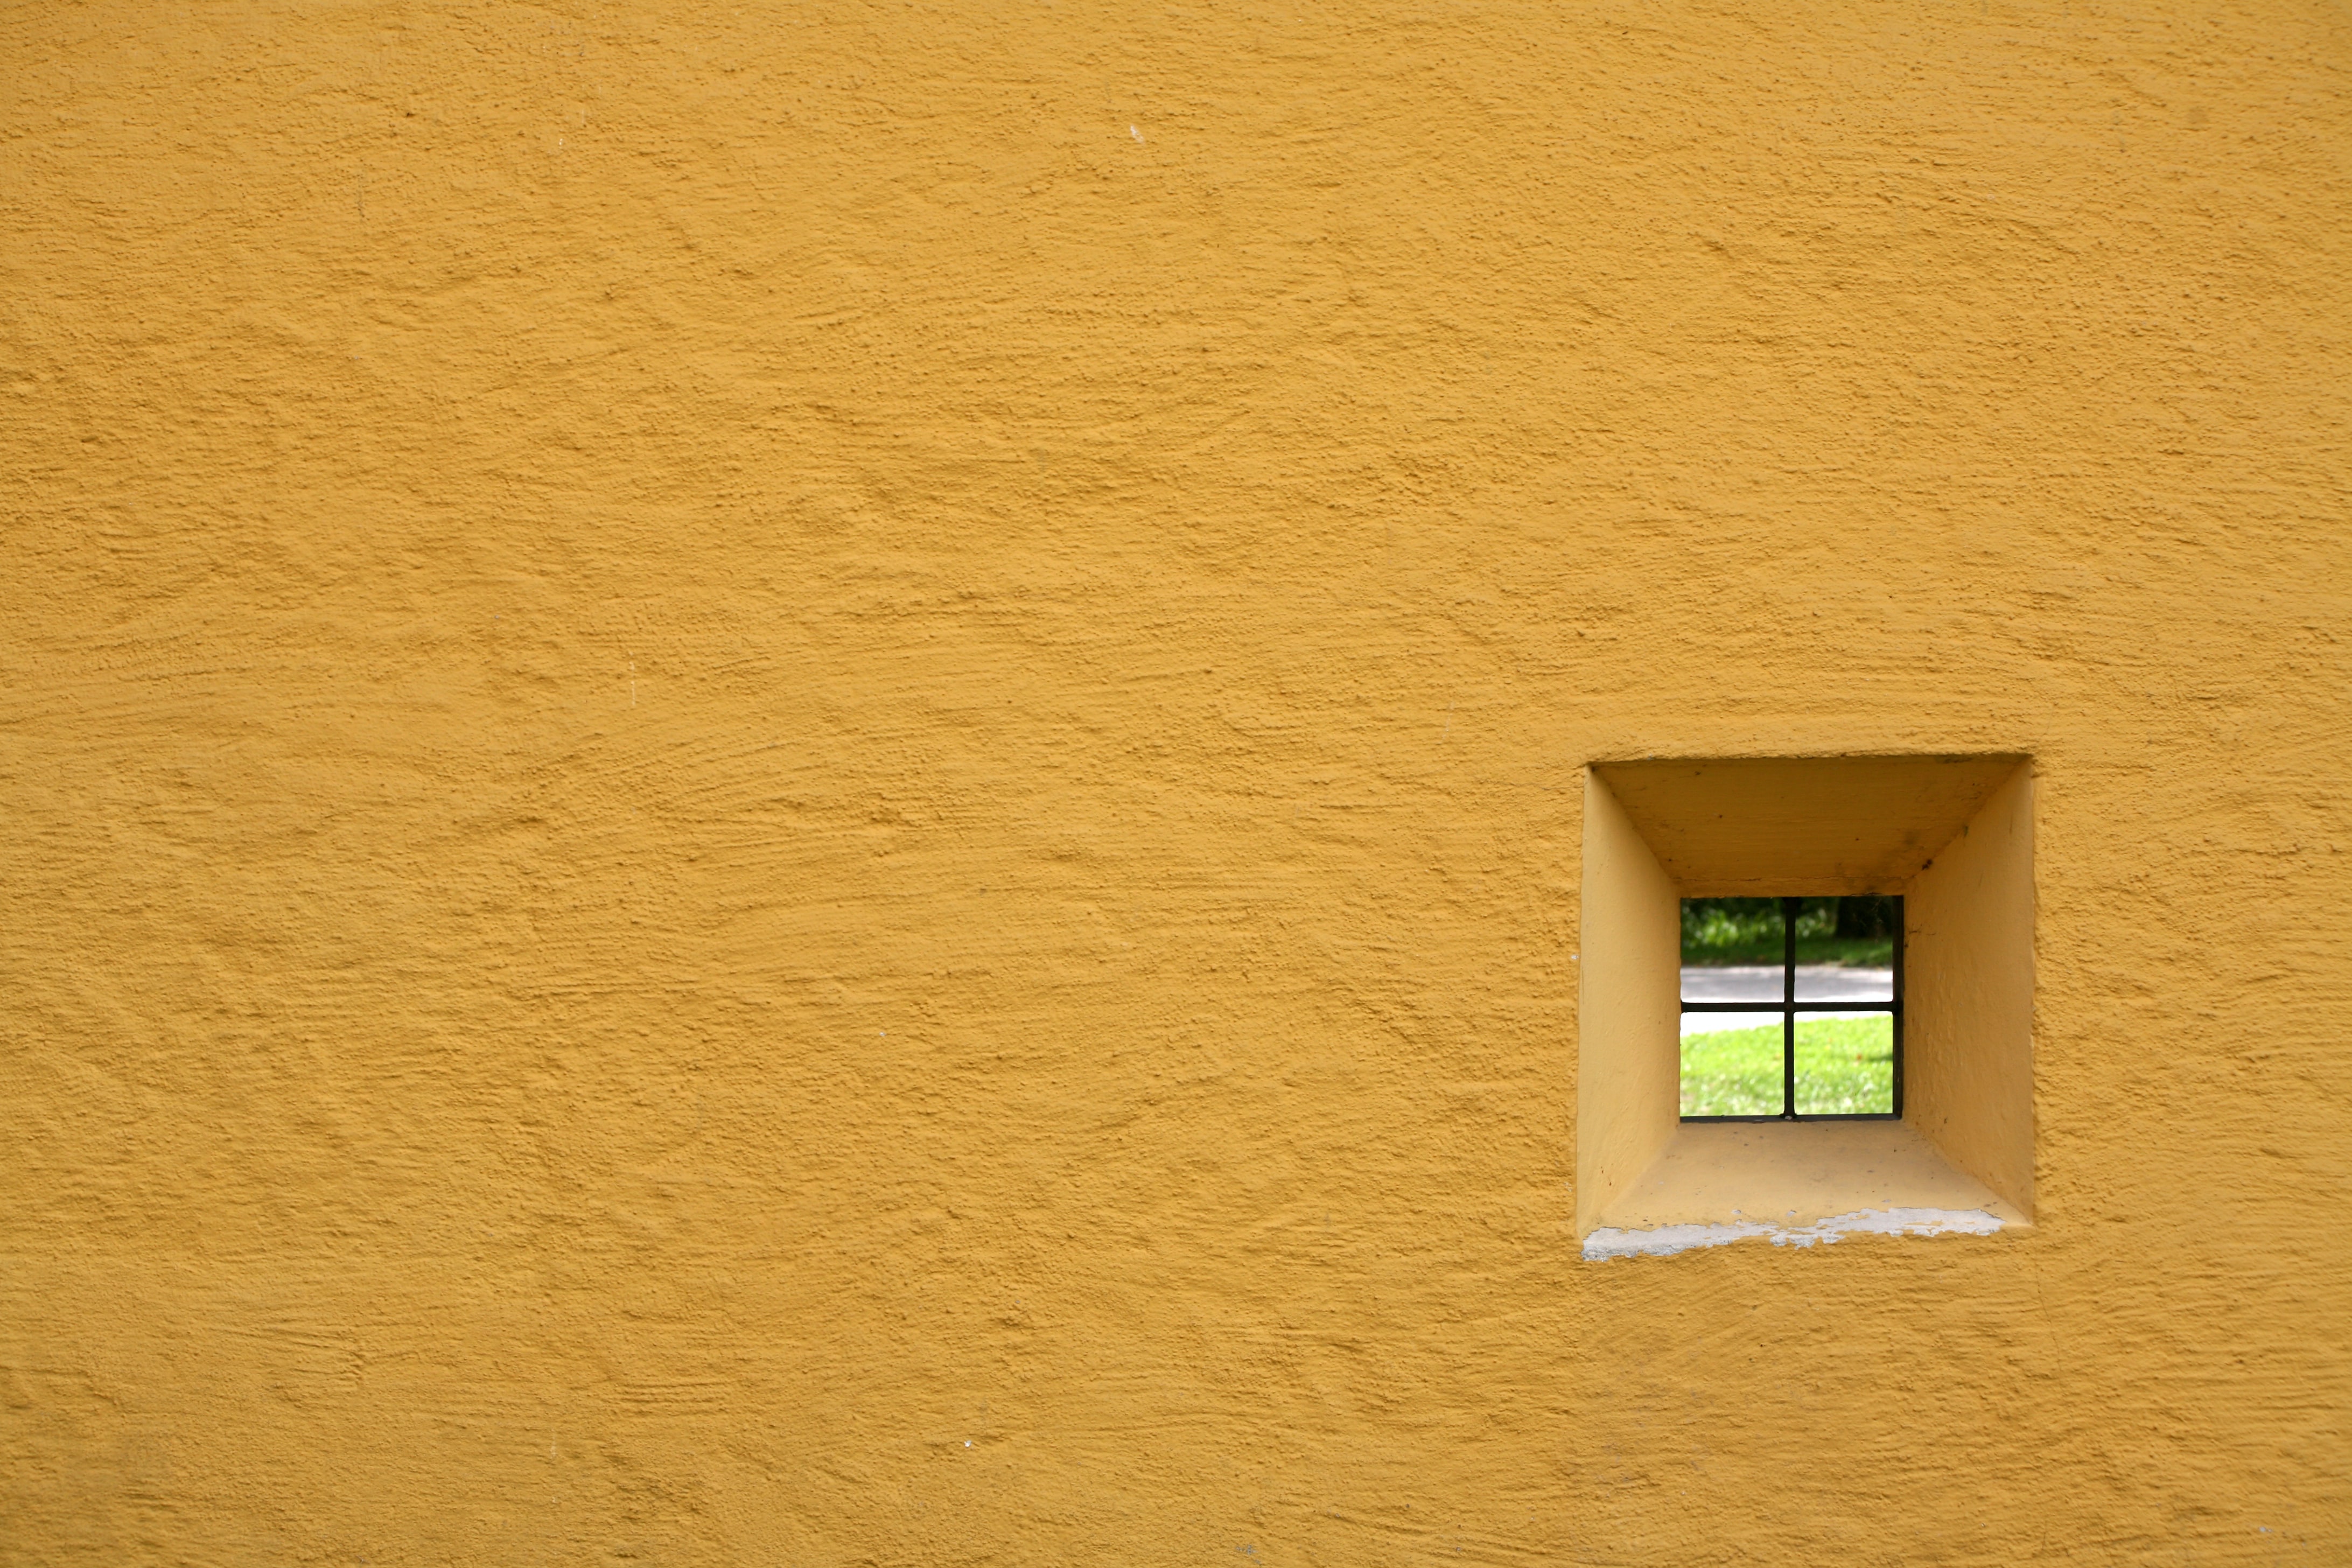 A yellow wall with a tiny window in the lower right